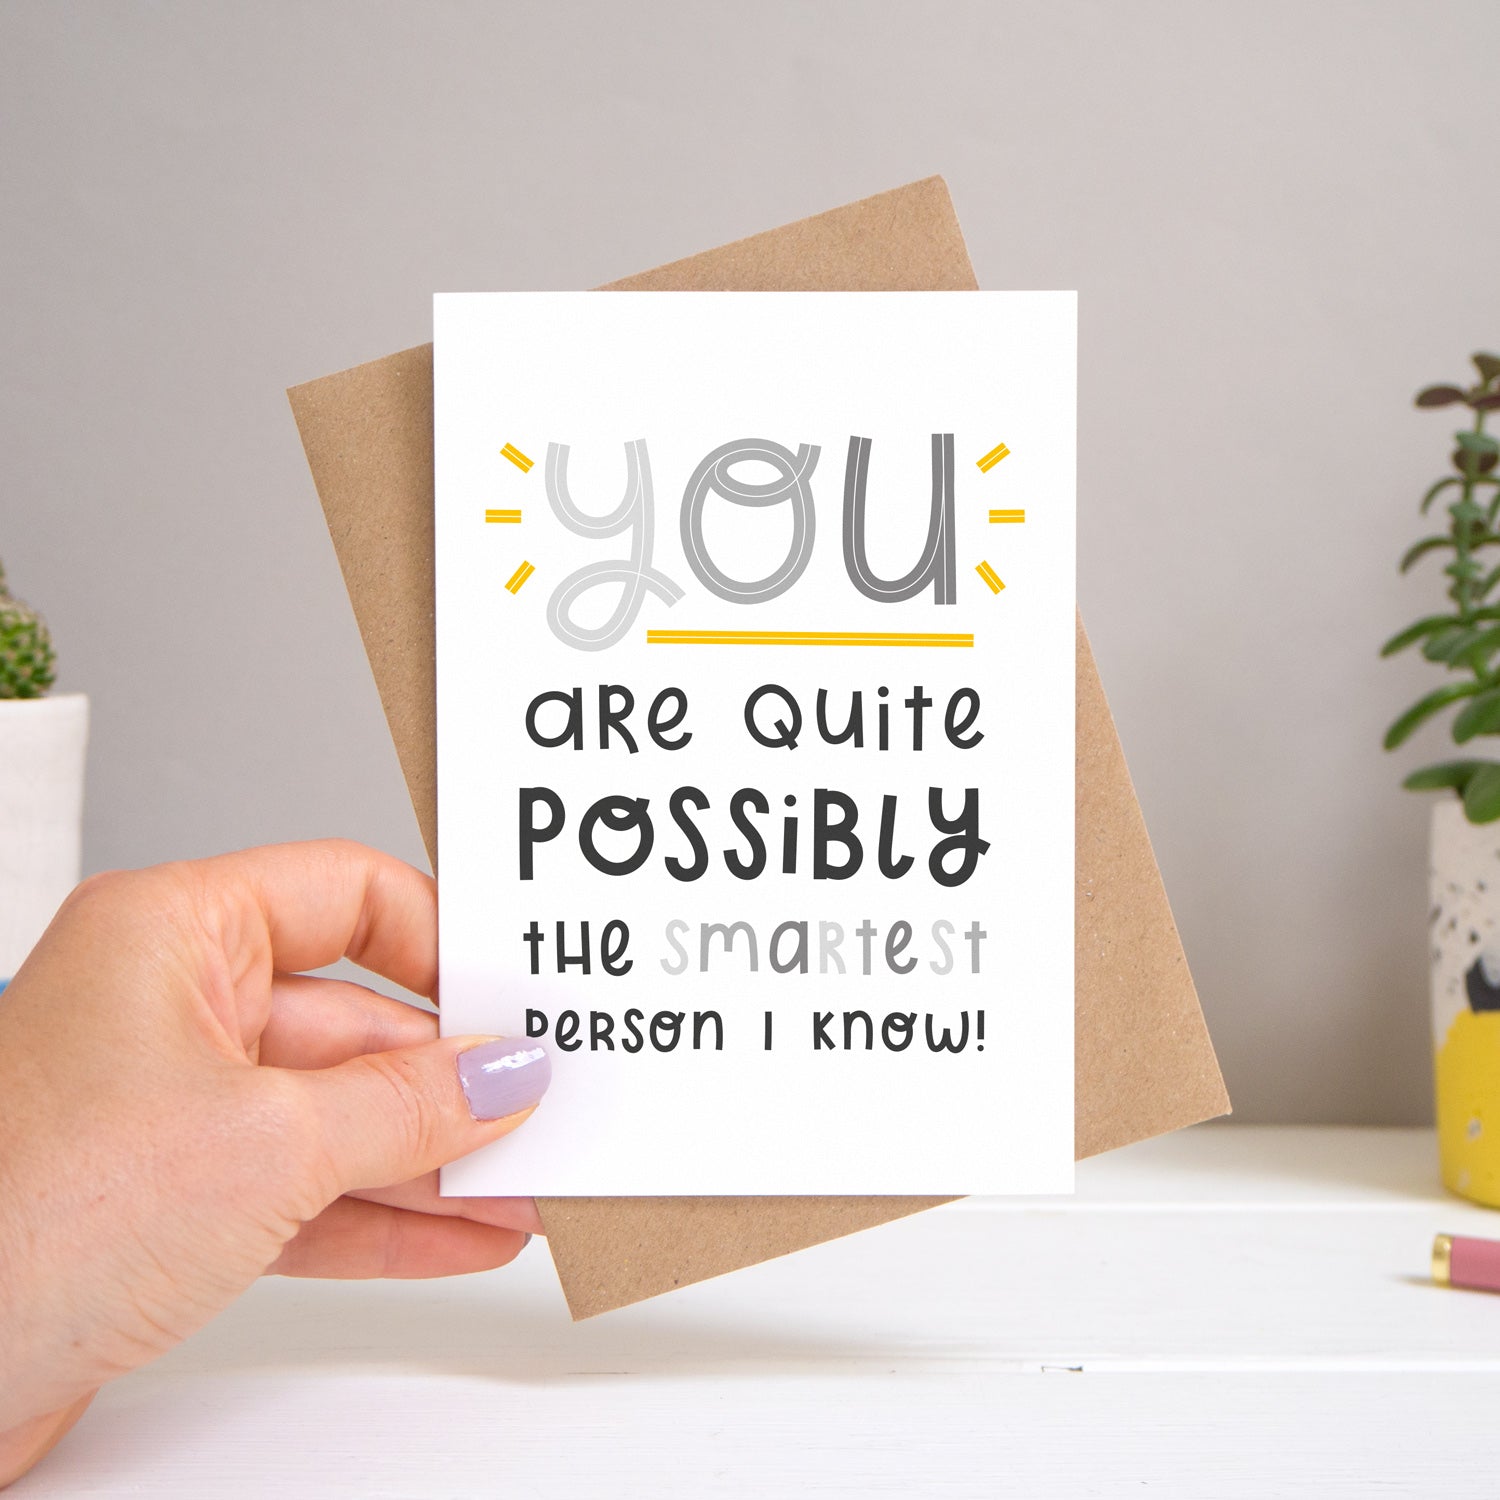 A ‘smartest person I know’ card held over a warm grey and white background with potted plants peeping the sides. Behind the card is a kraft brown envelope that comes with the card. The text on this version of the card is in varying tones of grey.